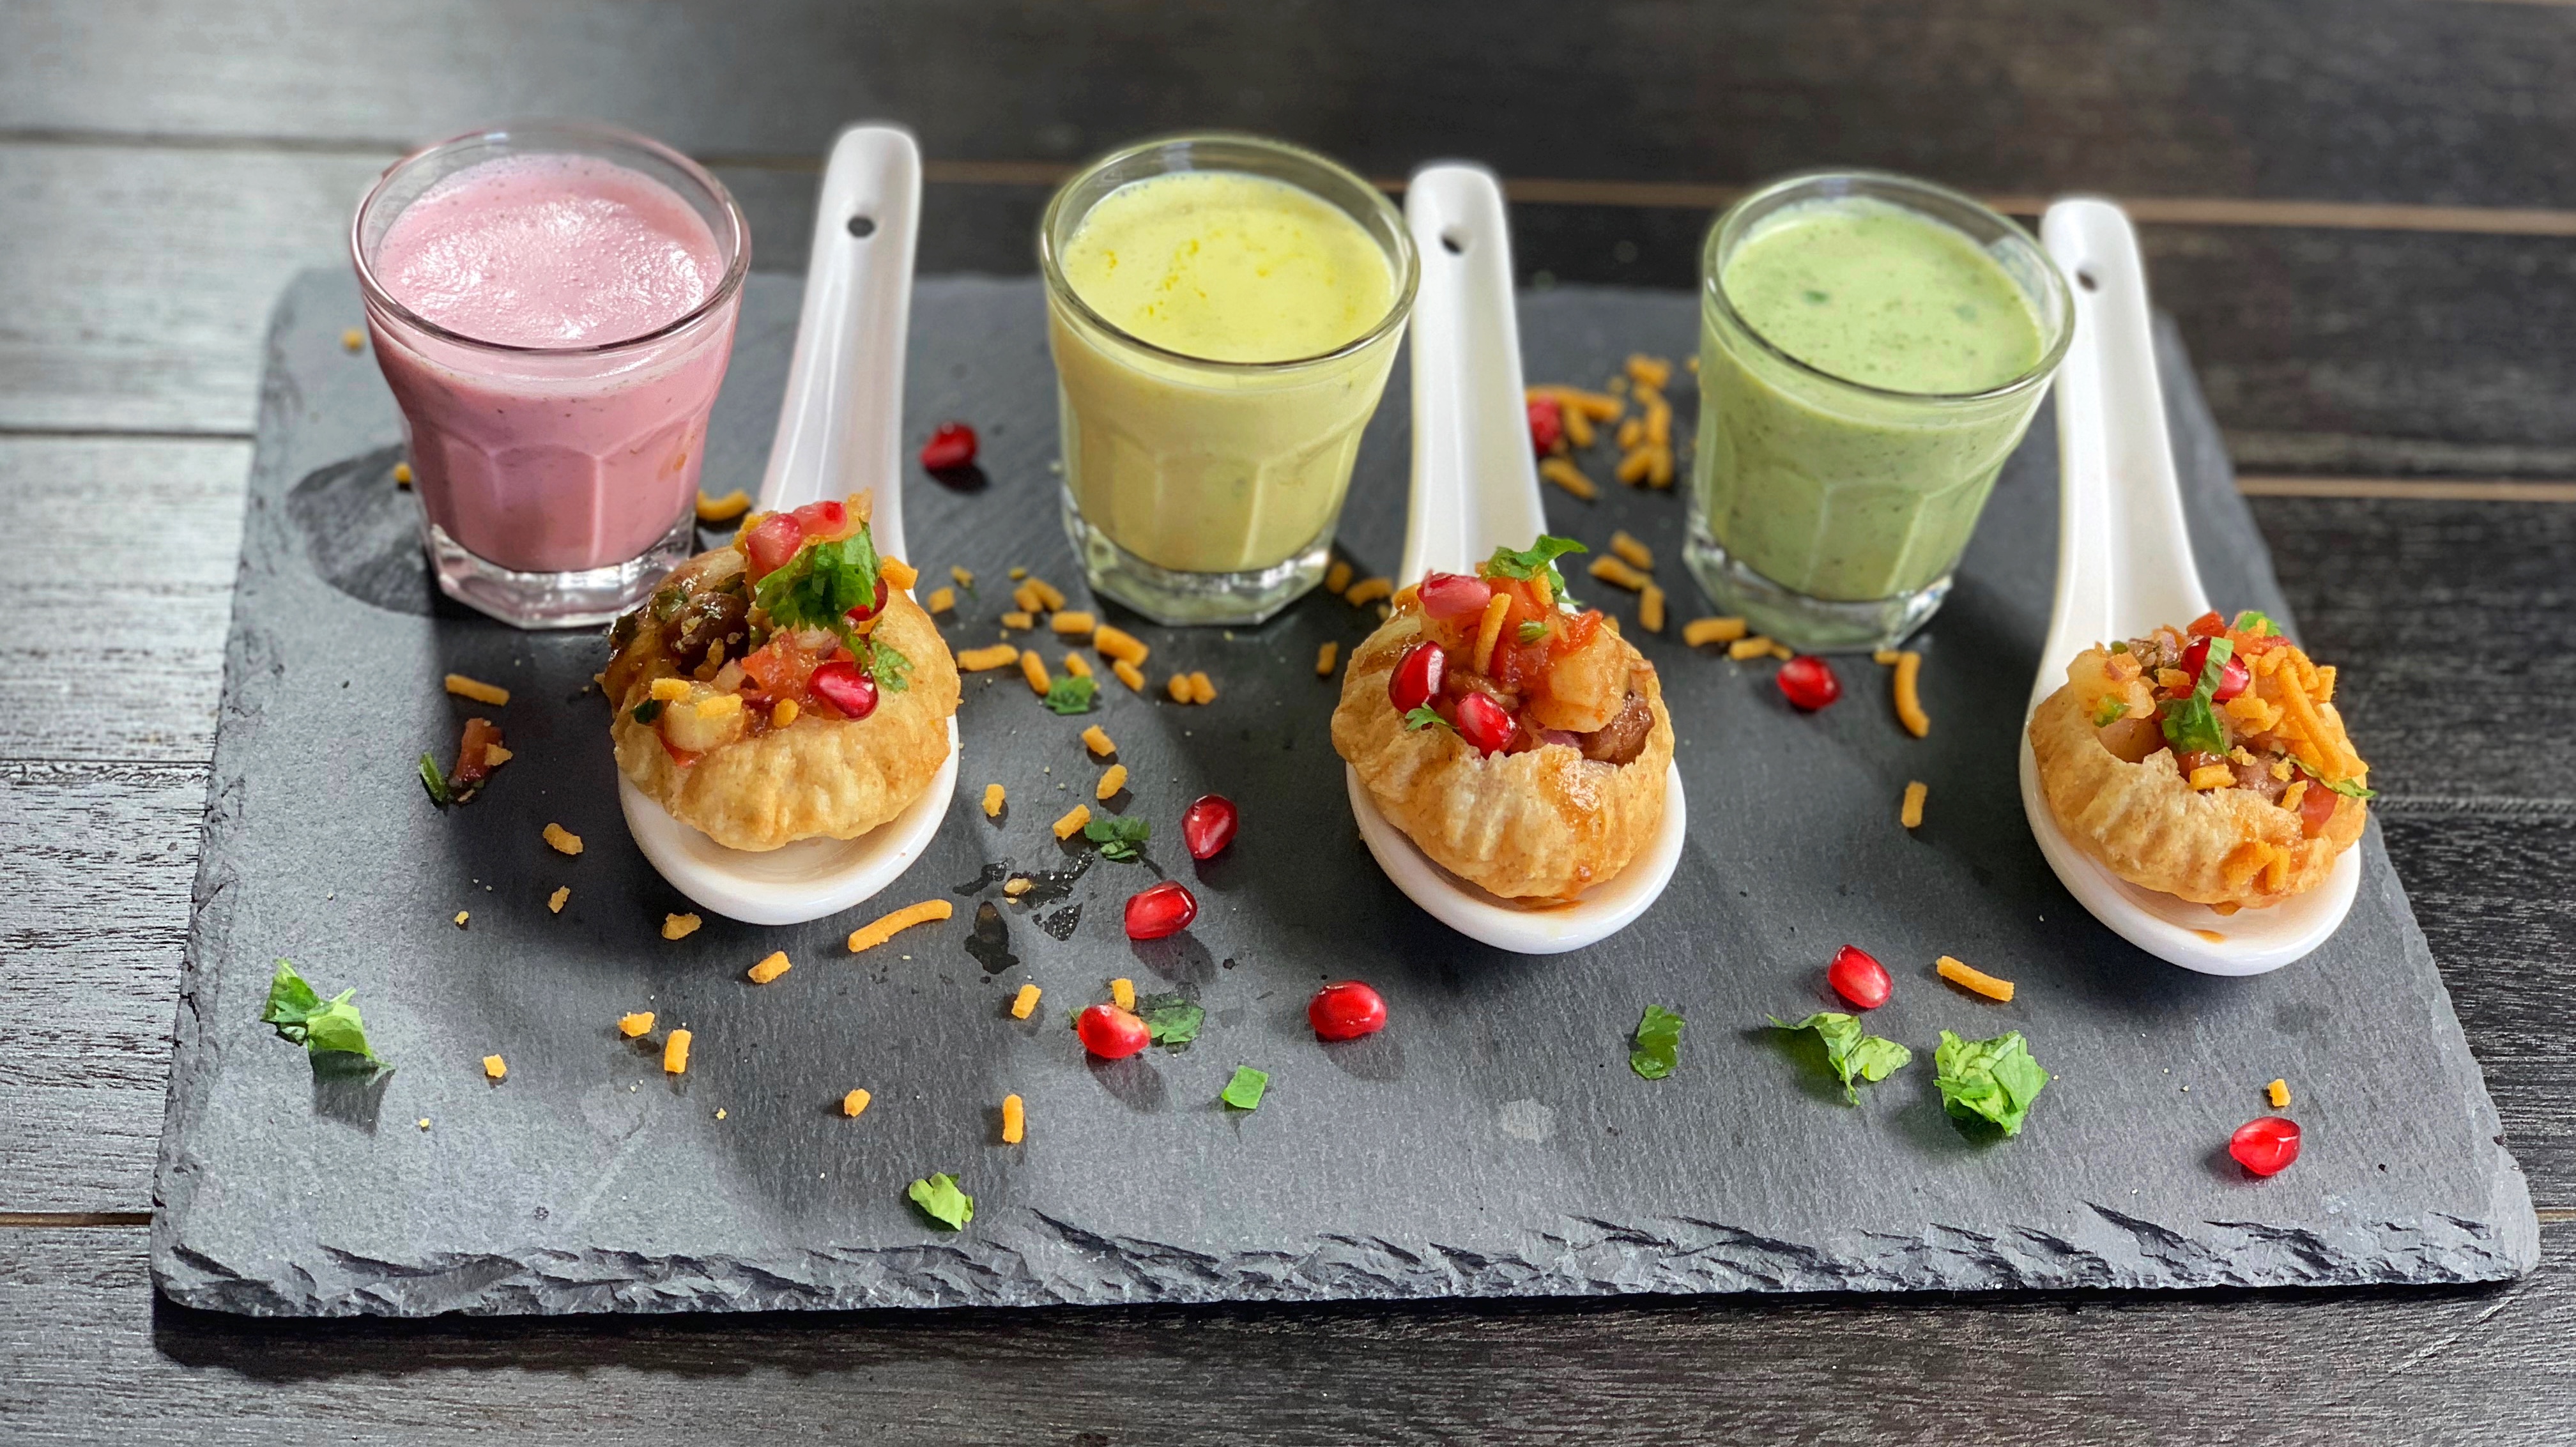 Rainbow Dahi Shots - a festive twist on the classic Indian street and comfort food, this version of panipuri, drenched with yogurt based pani and stuffed with tangy masala is the perfect blend between colors and flavors!